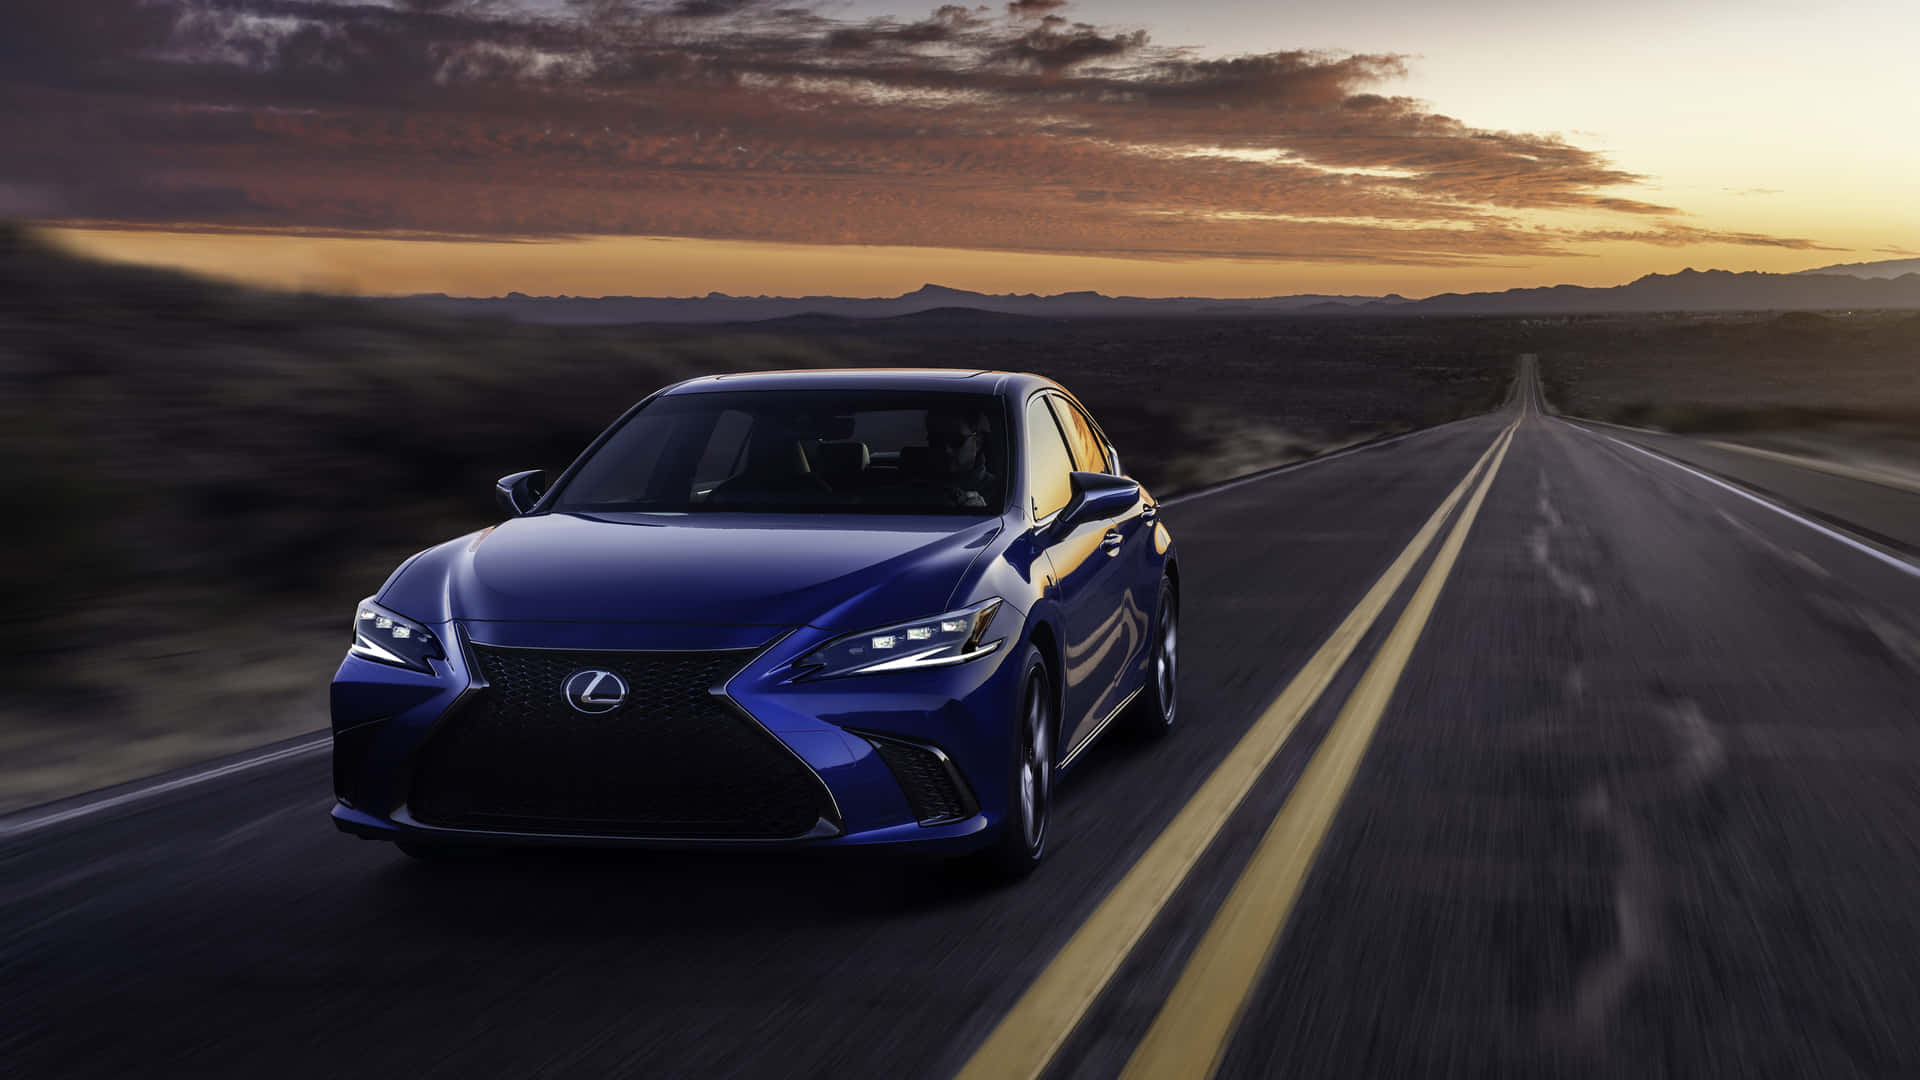 The 2019 Lexus Cs Driving Down A Road At Sunset